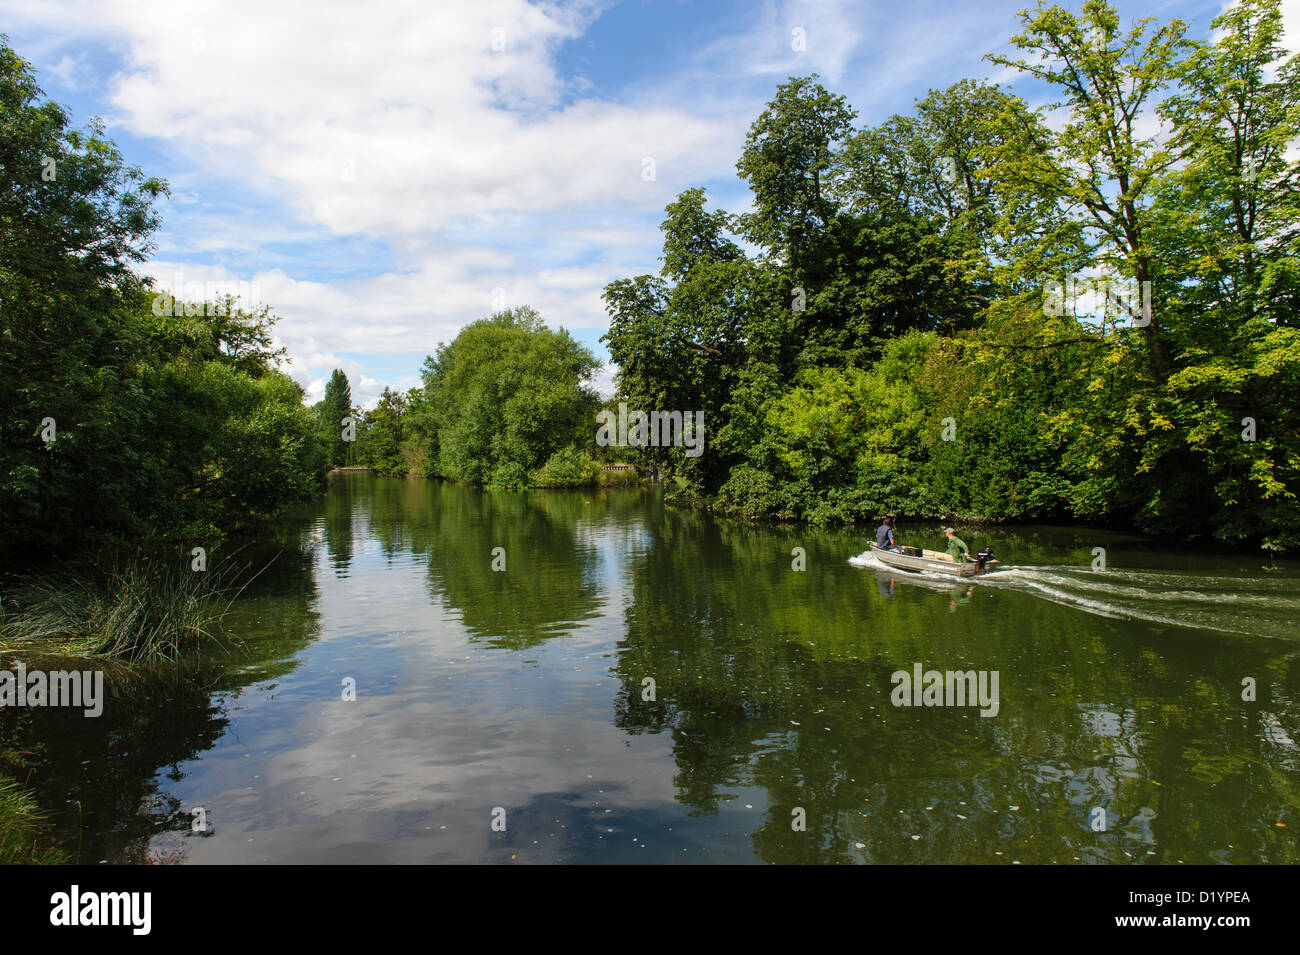 Sonning, Themse Stockfoto